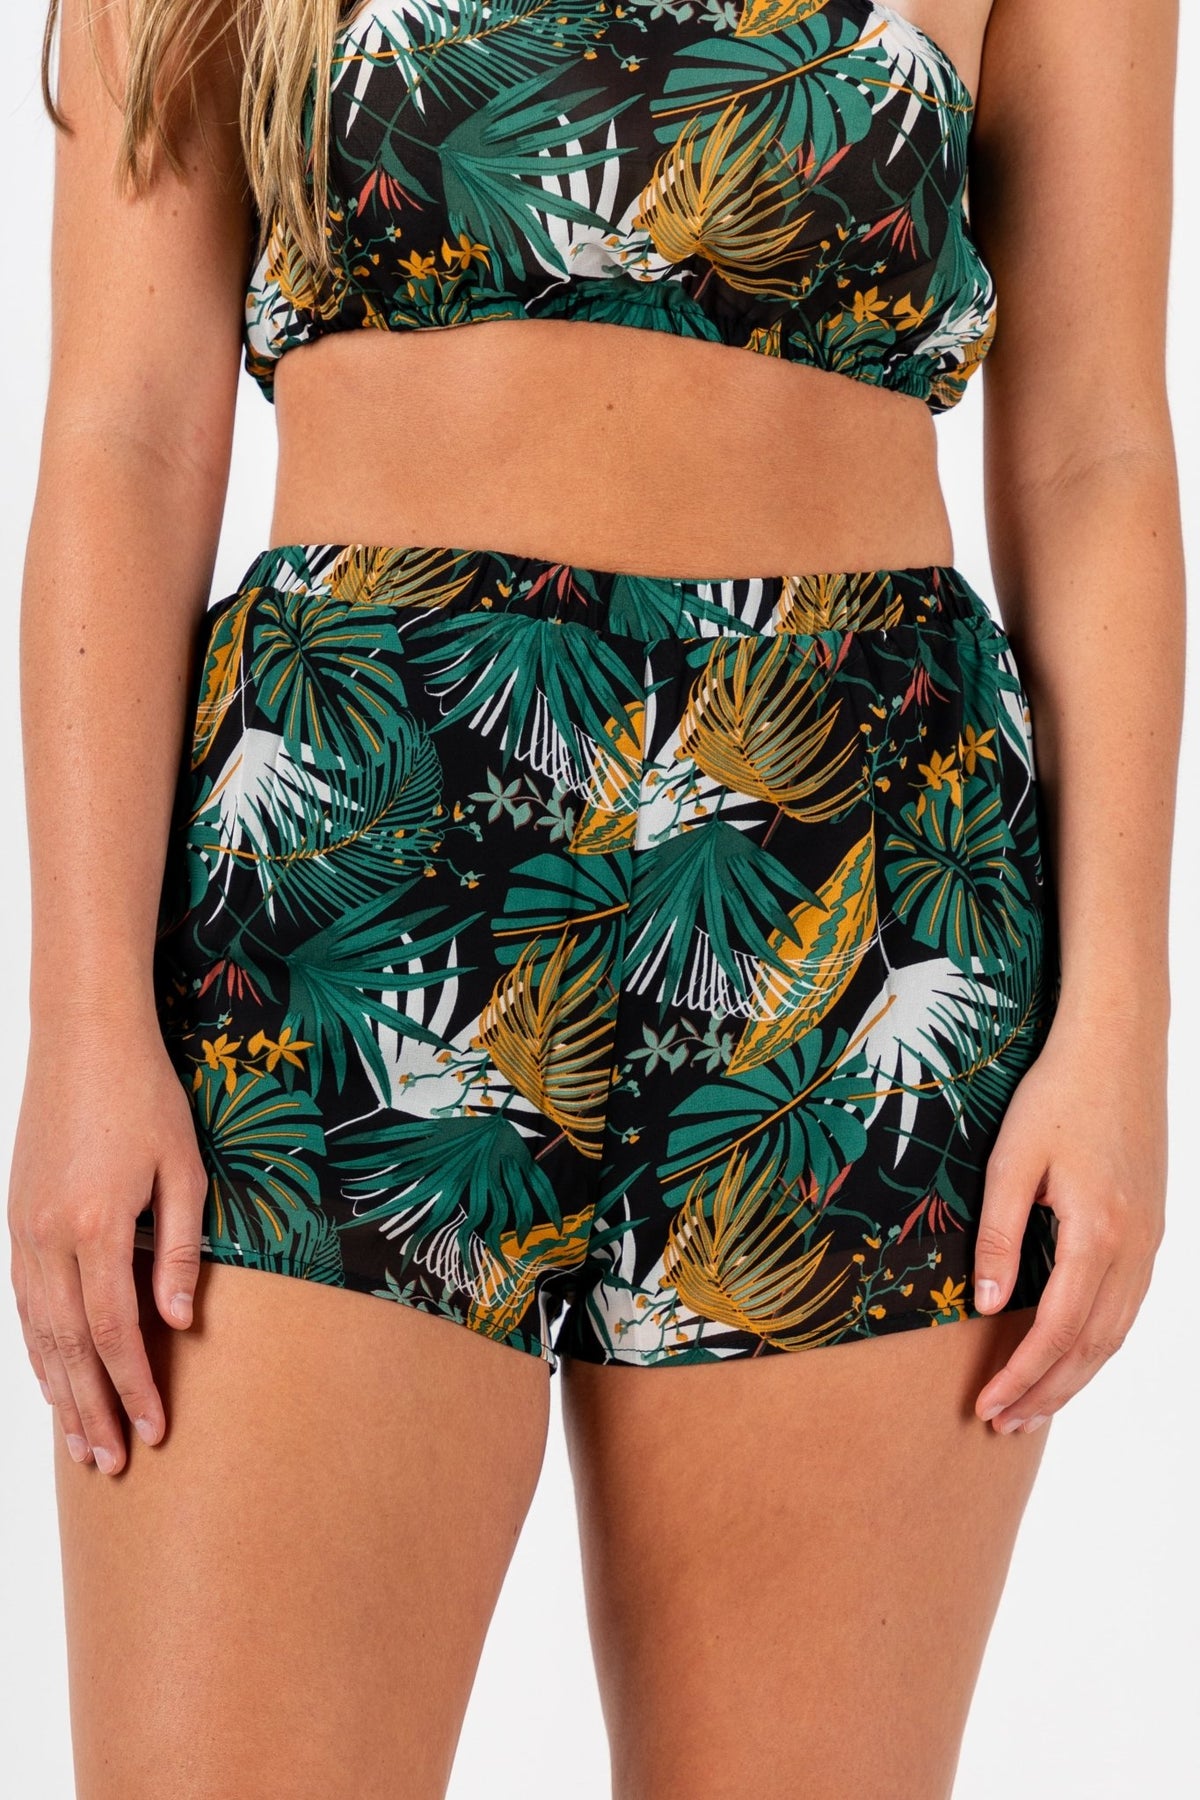 Tropical shorts black - Trendy Top - Cute Vacation Collection at Lush Fashion Lounge Boutique in Oklahoma City